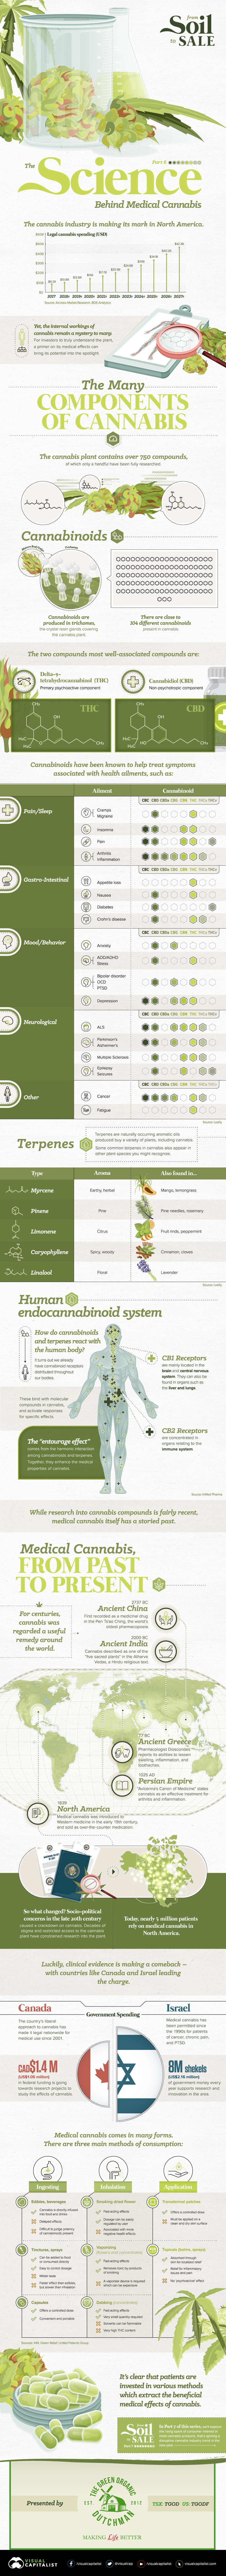 The Science Behind Medical Cannabis